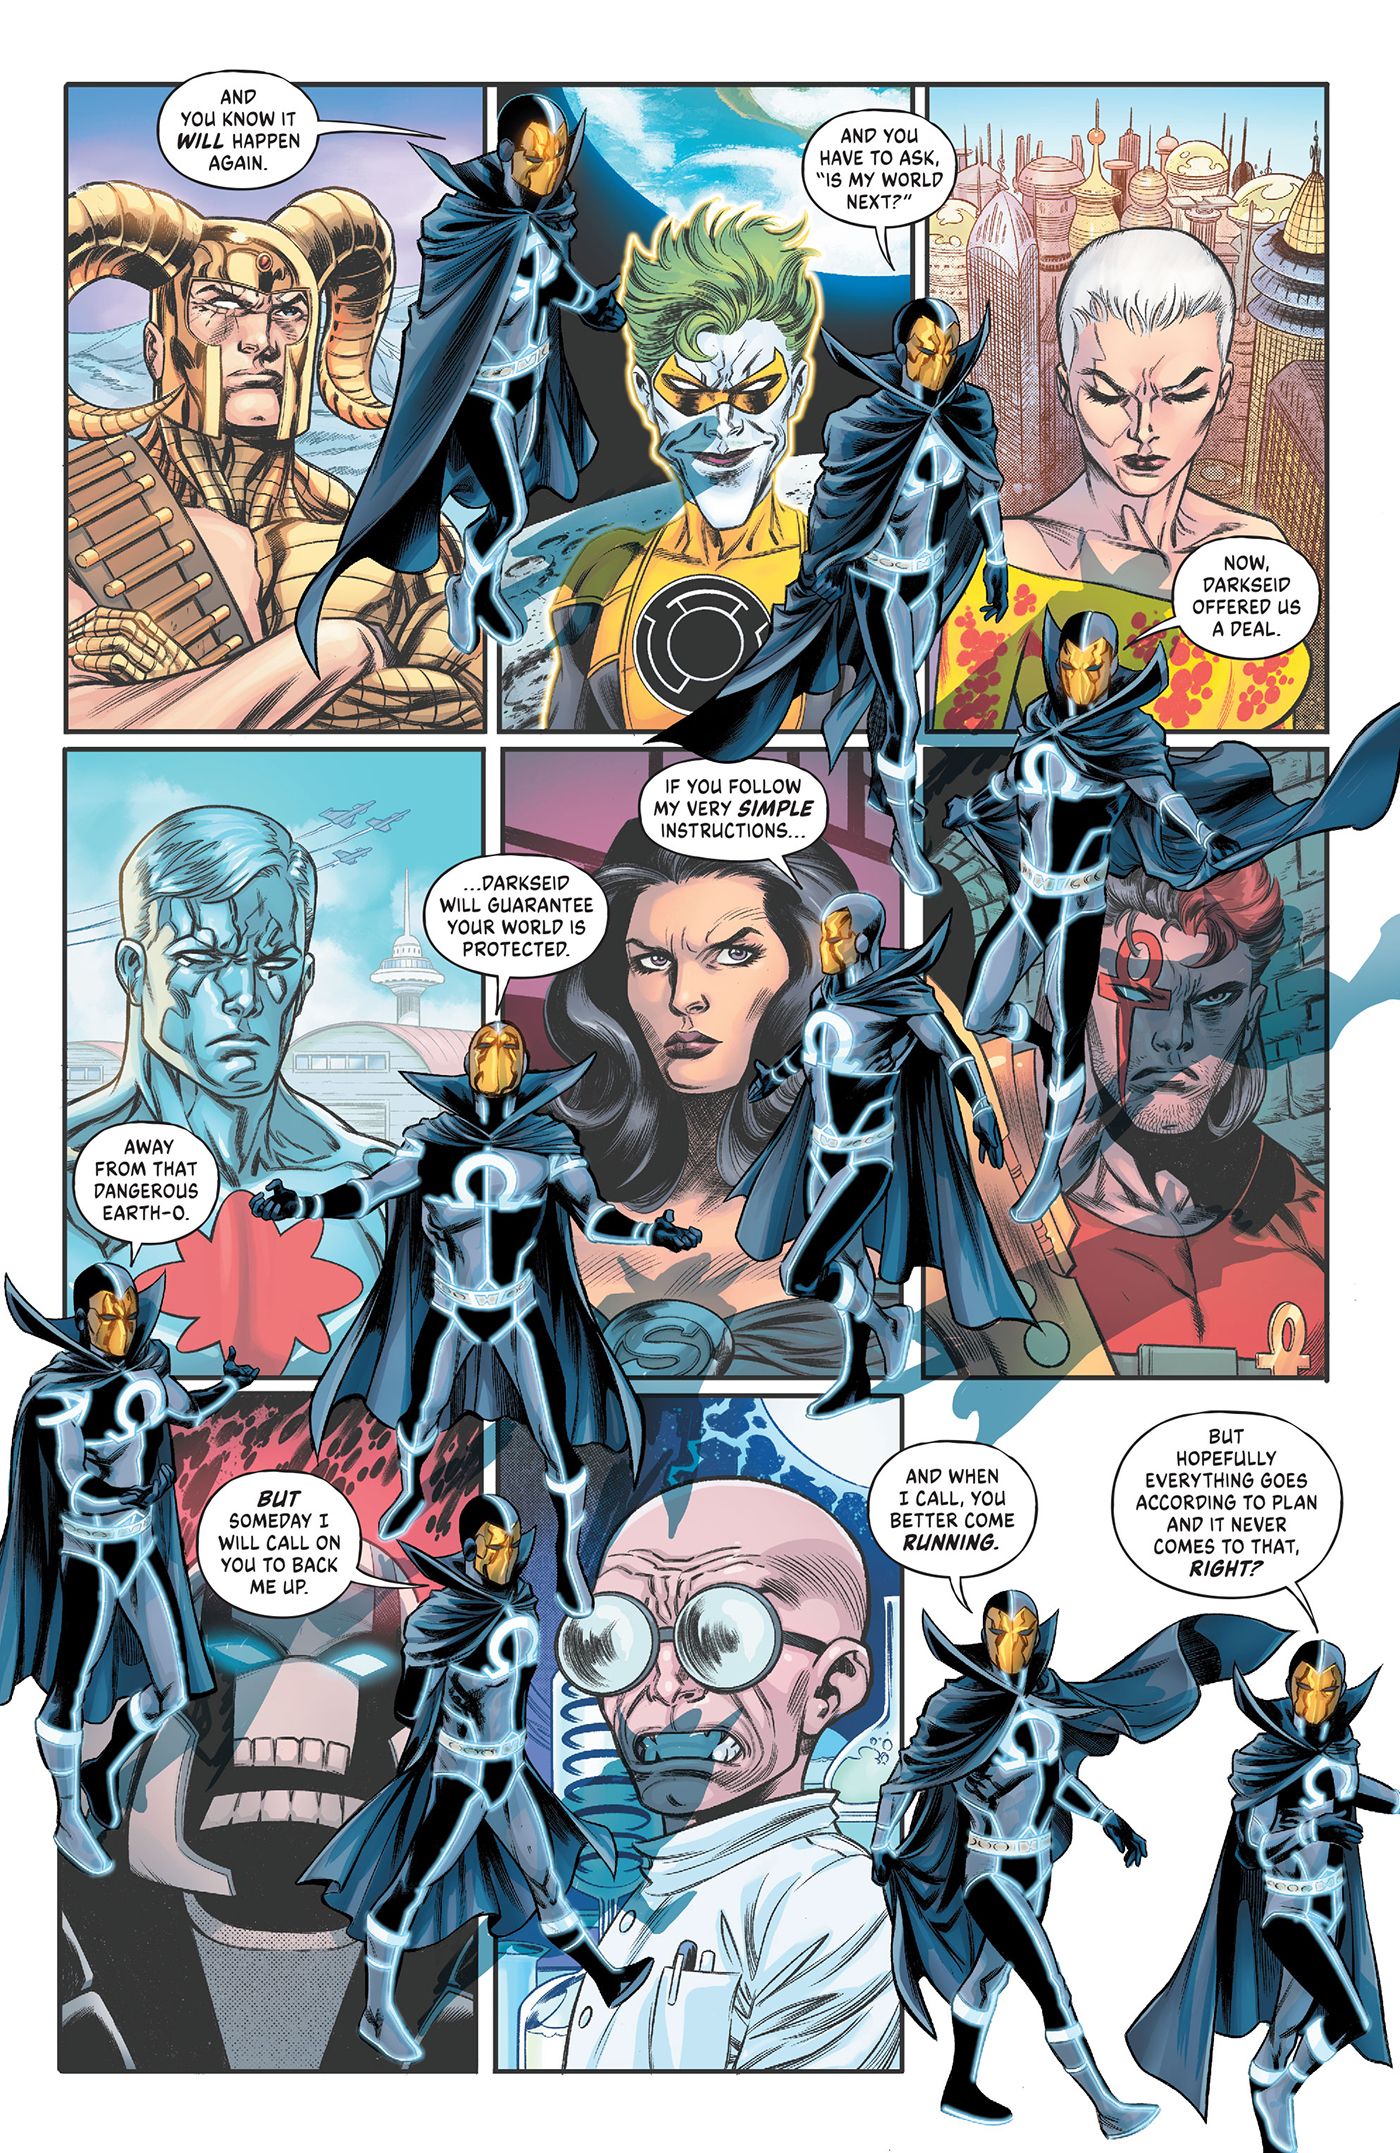 Psycho Pirate speaks to villains across the mutliverse to join Darkseid.